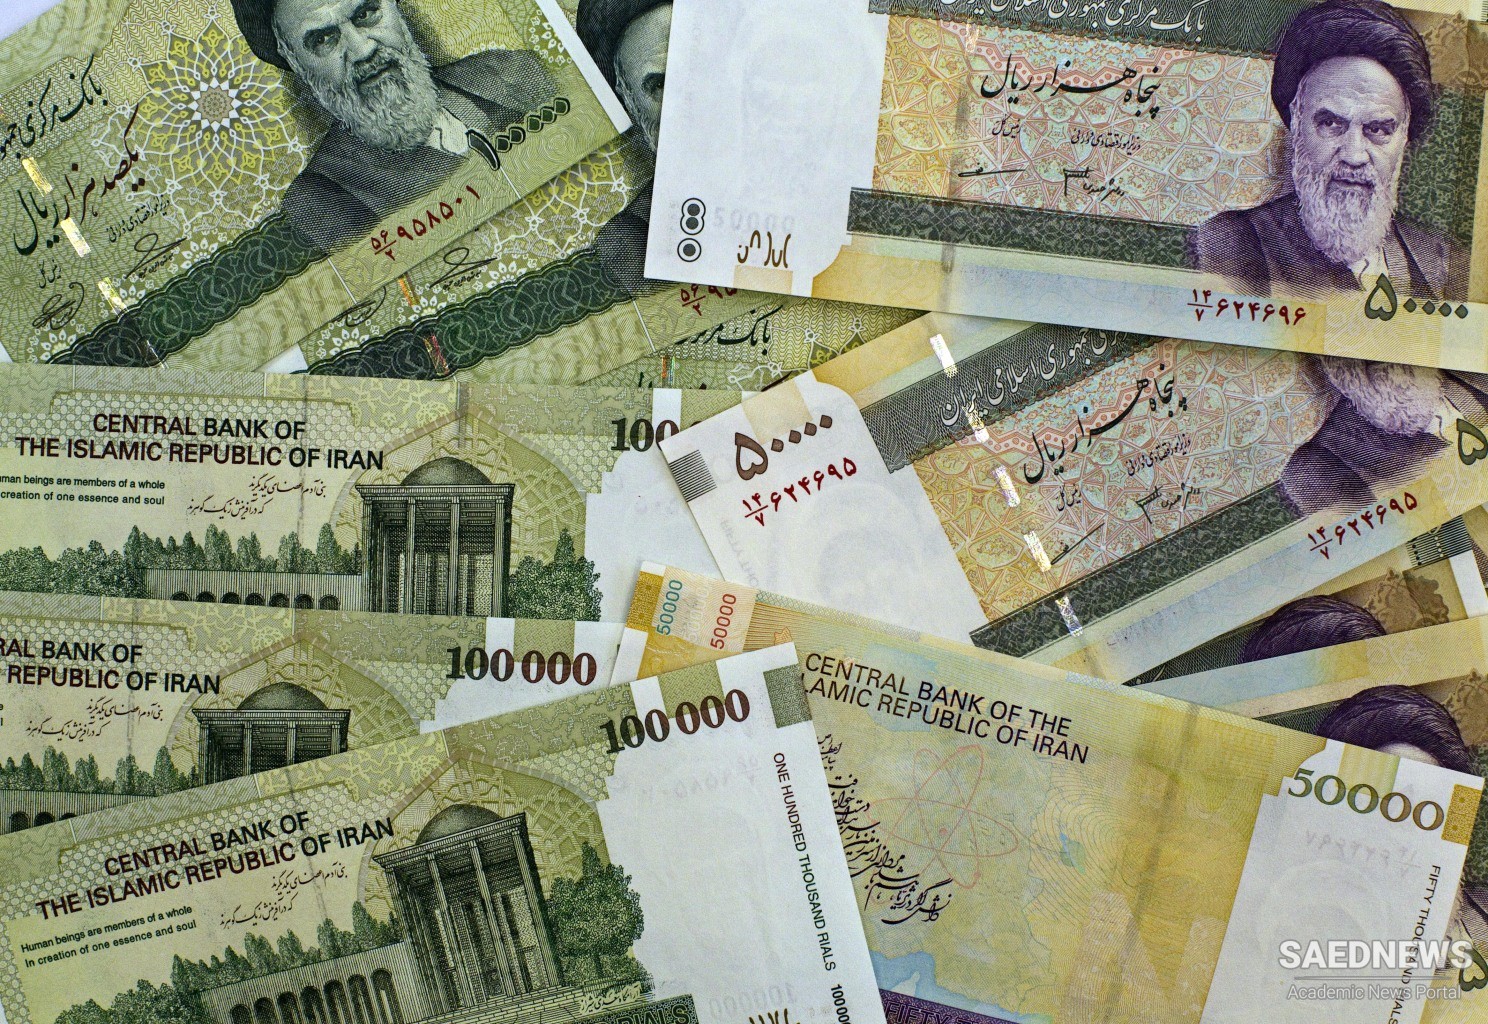 Iran National Currency: Rial or Toman?